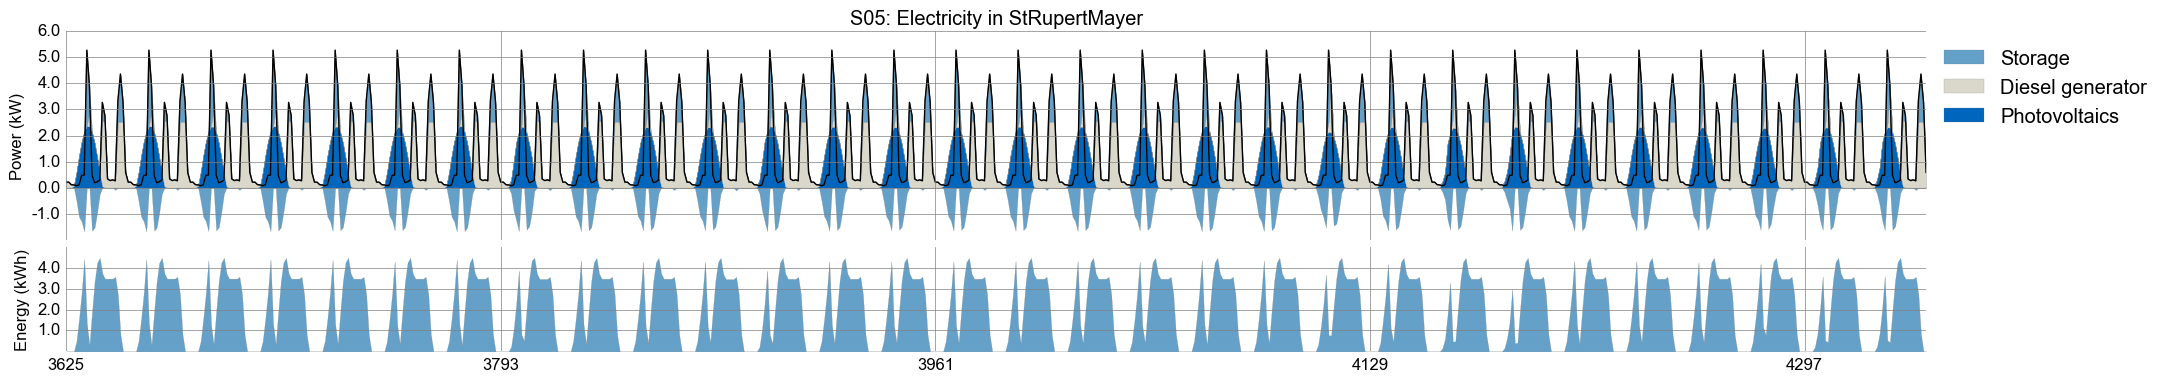 Timeseries plot of month June for electricity generation in scenario s05: photovoltaics covers over half the load, using battery as support during morning/evening hours. Diesel as night backup.